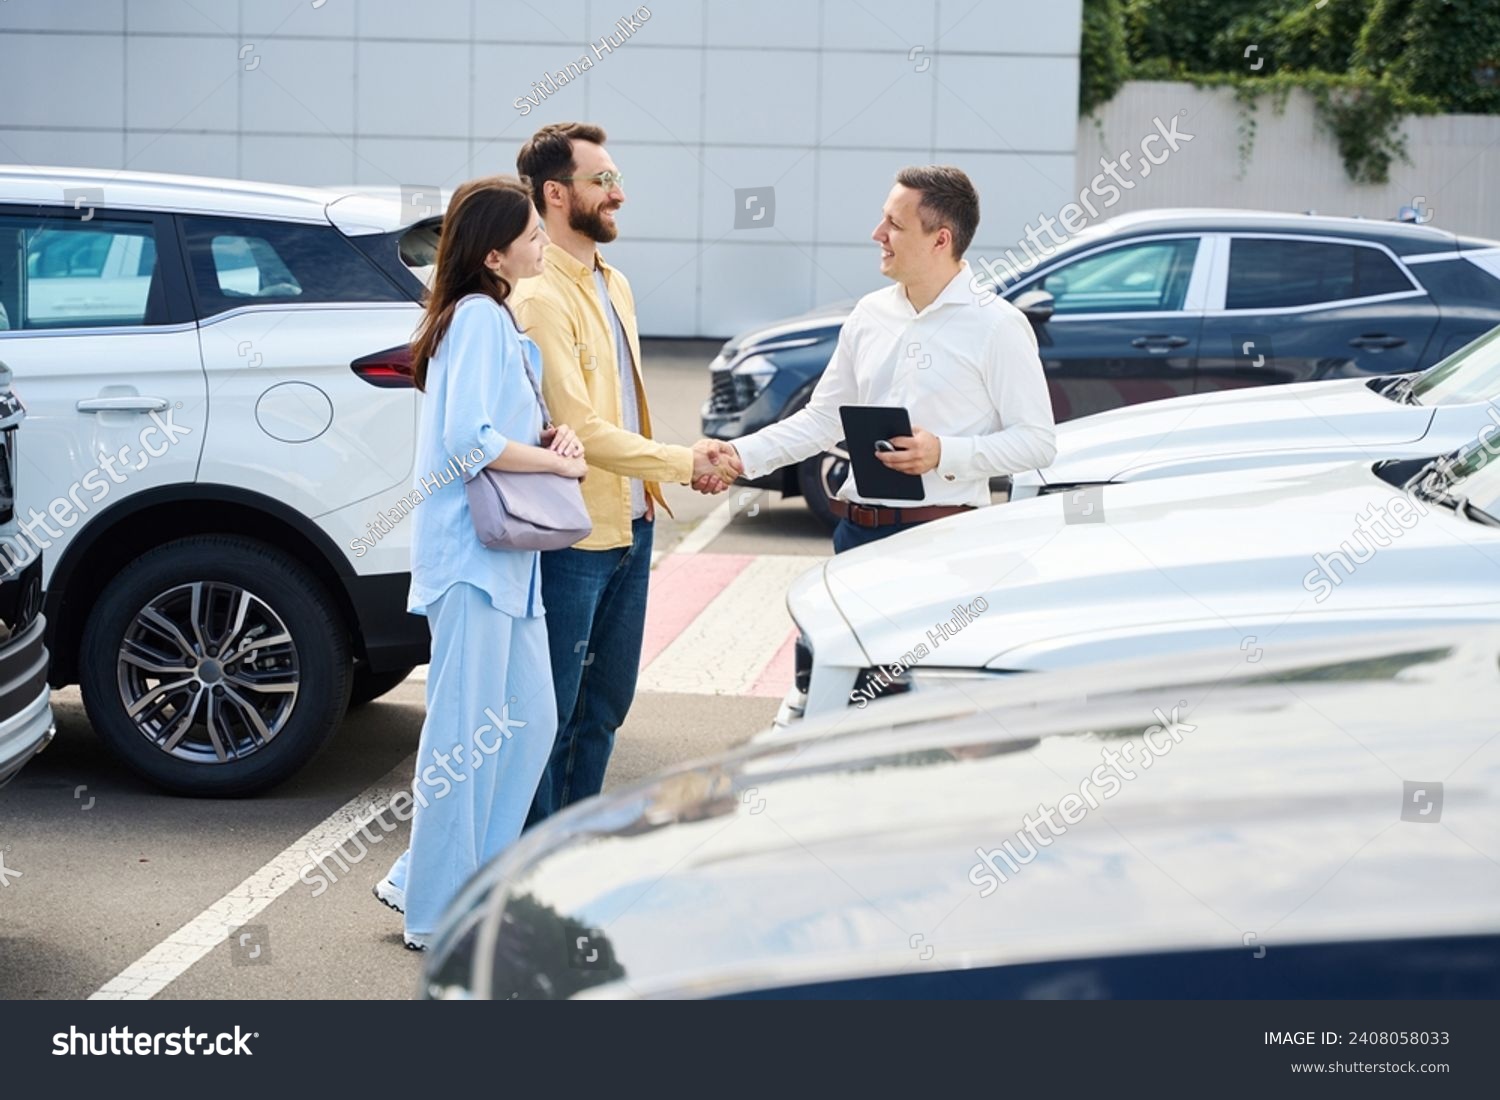 Car dealership employee communicates with couple of clients before test drive #2408058033